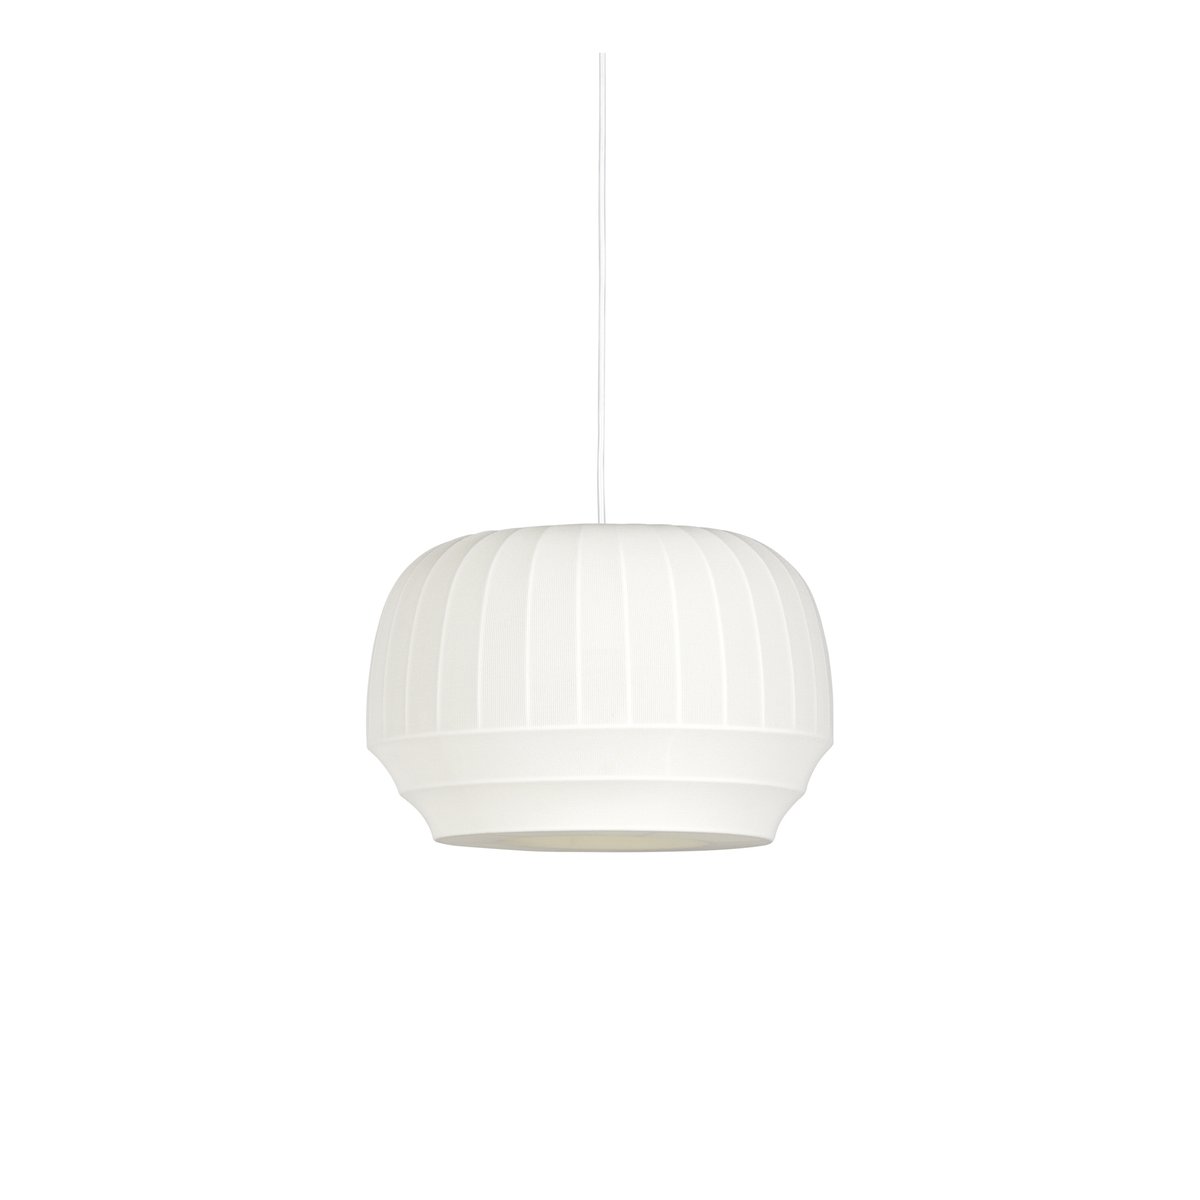 Northern Tradition hanglamp small white White